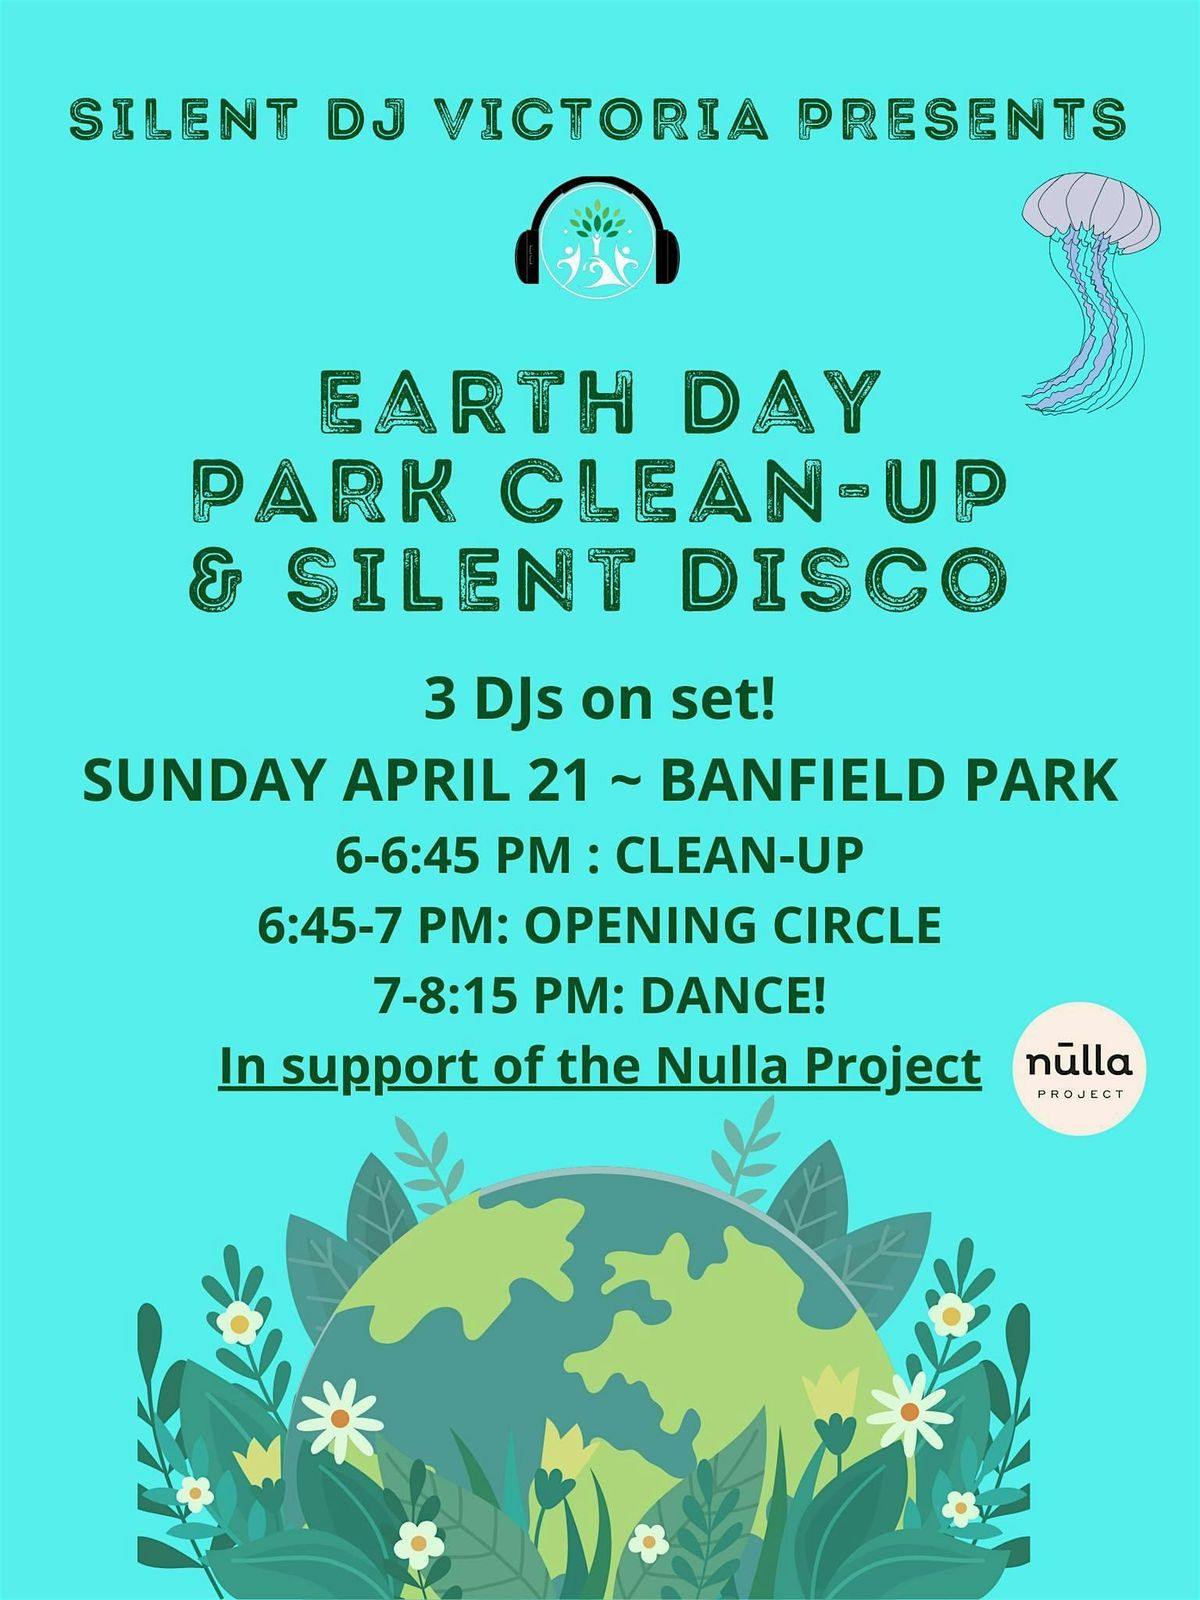 EARTH DAY PARK CLEANUP & SILENT DISCO